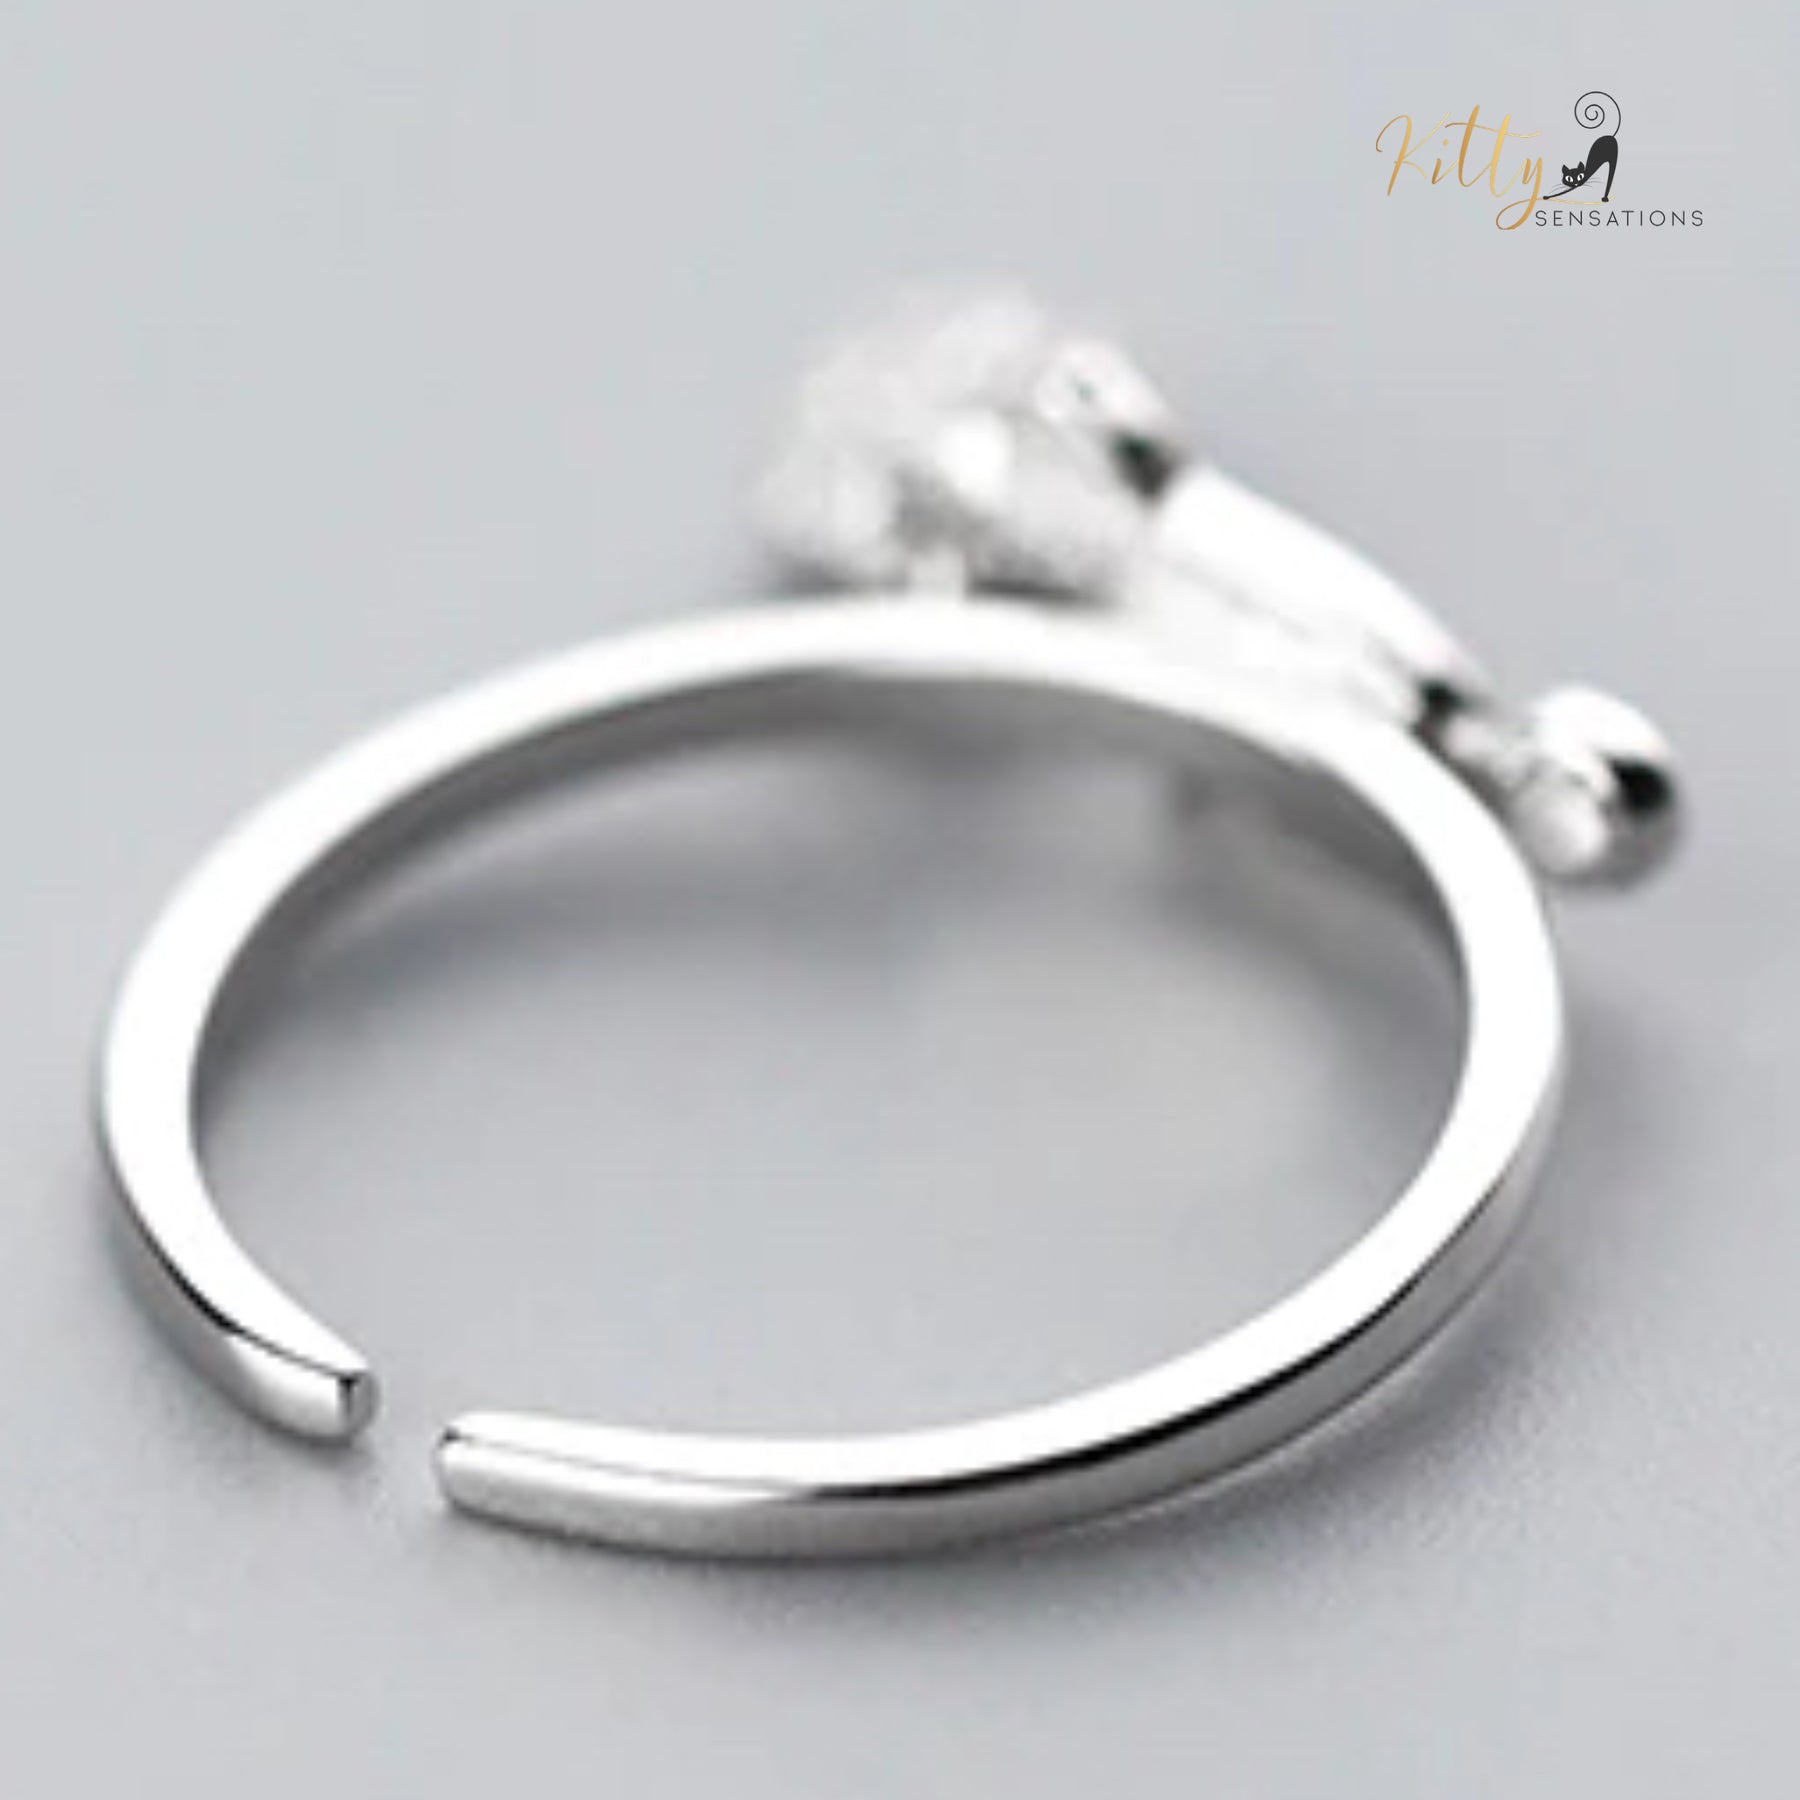 Playful Cat Ring in Solid 924 Sterling Silver - Adjustable